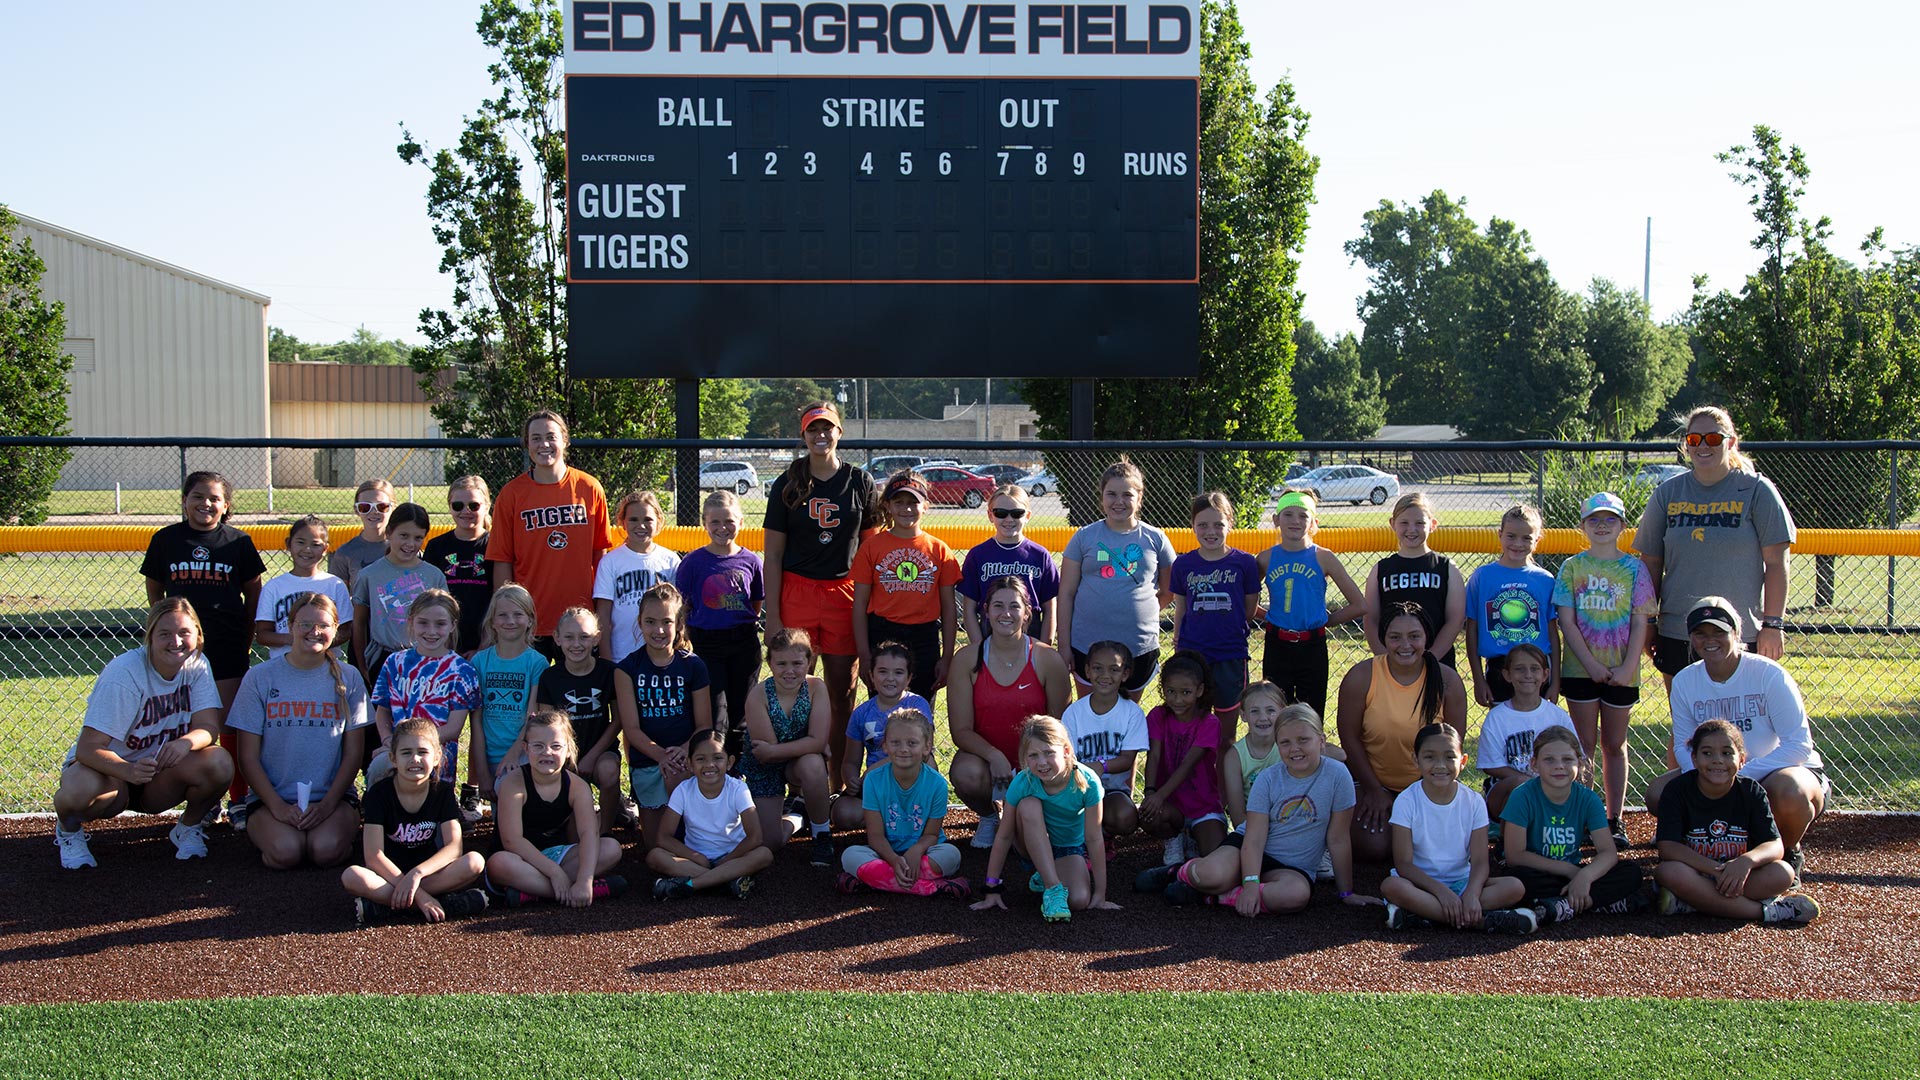 Large turnout for Cowley softball camps